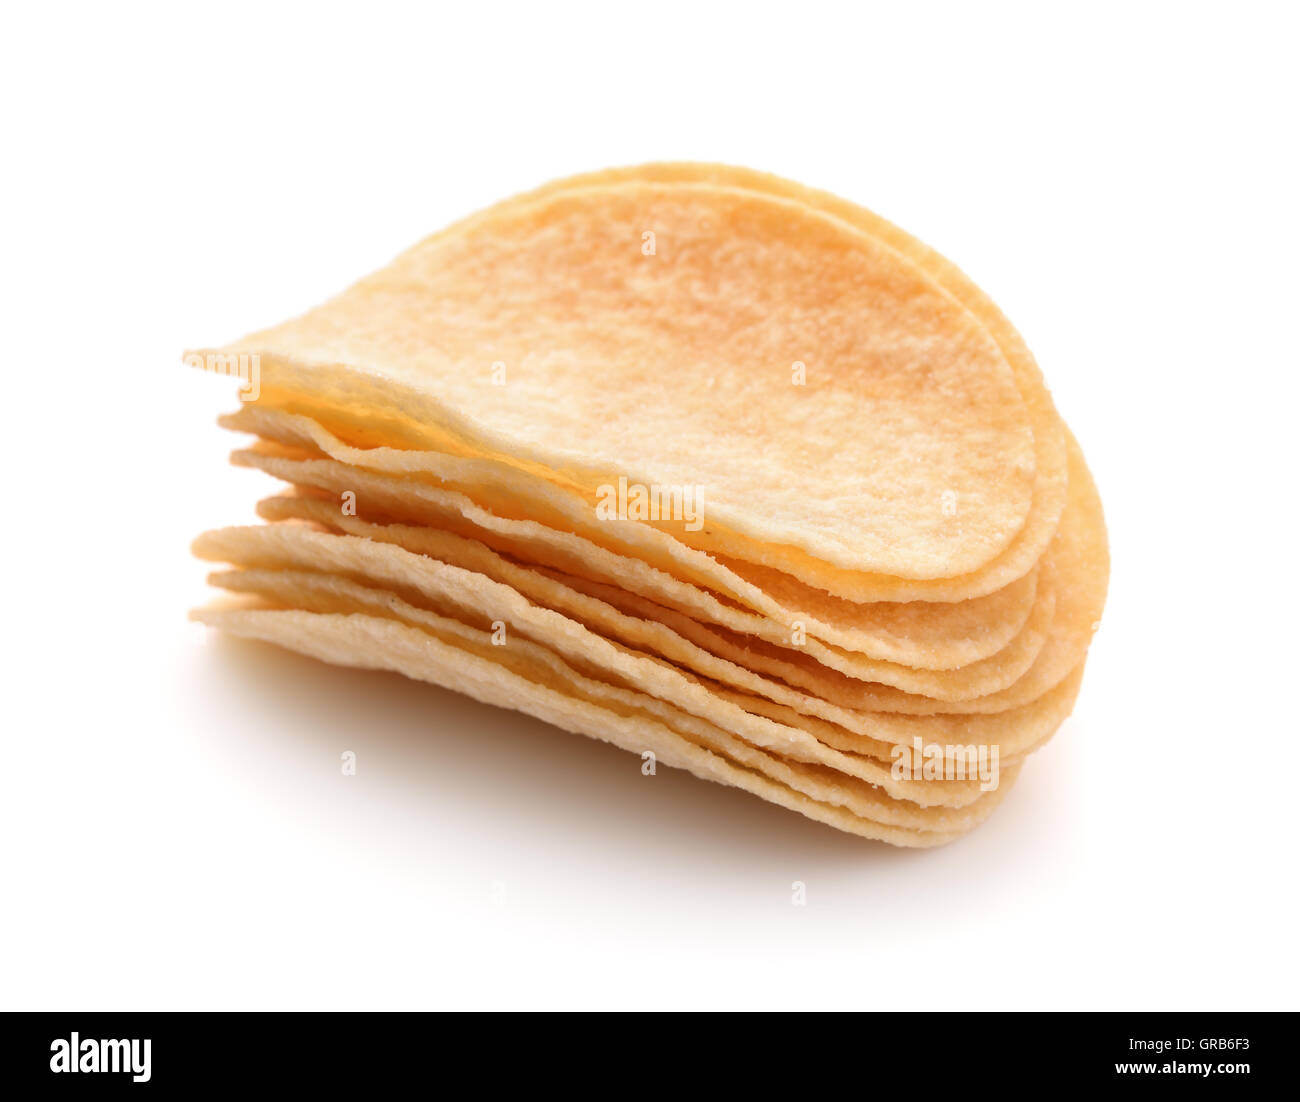 Stack of potato chips isolated on white Stock Photo